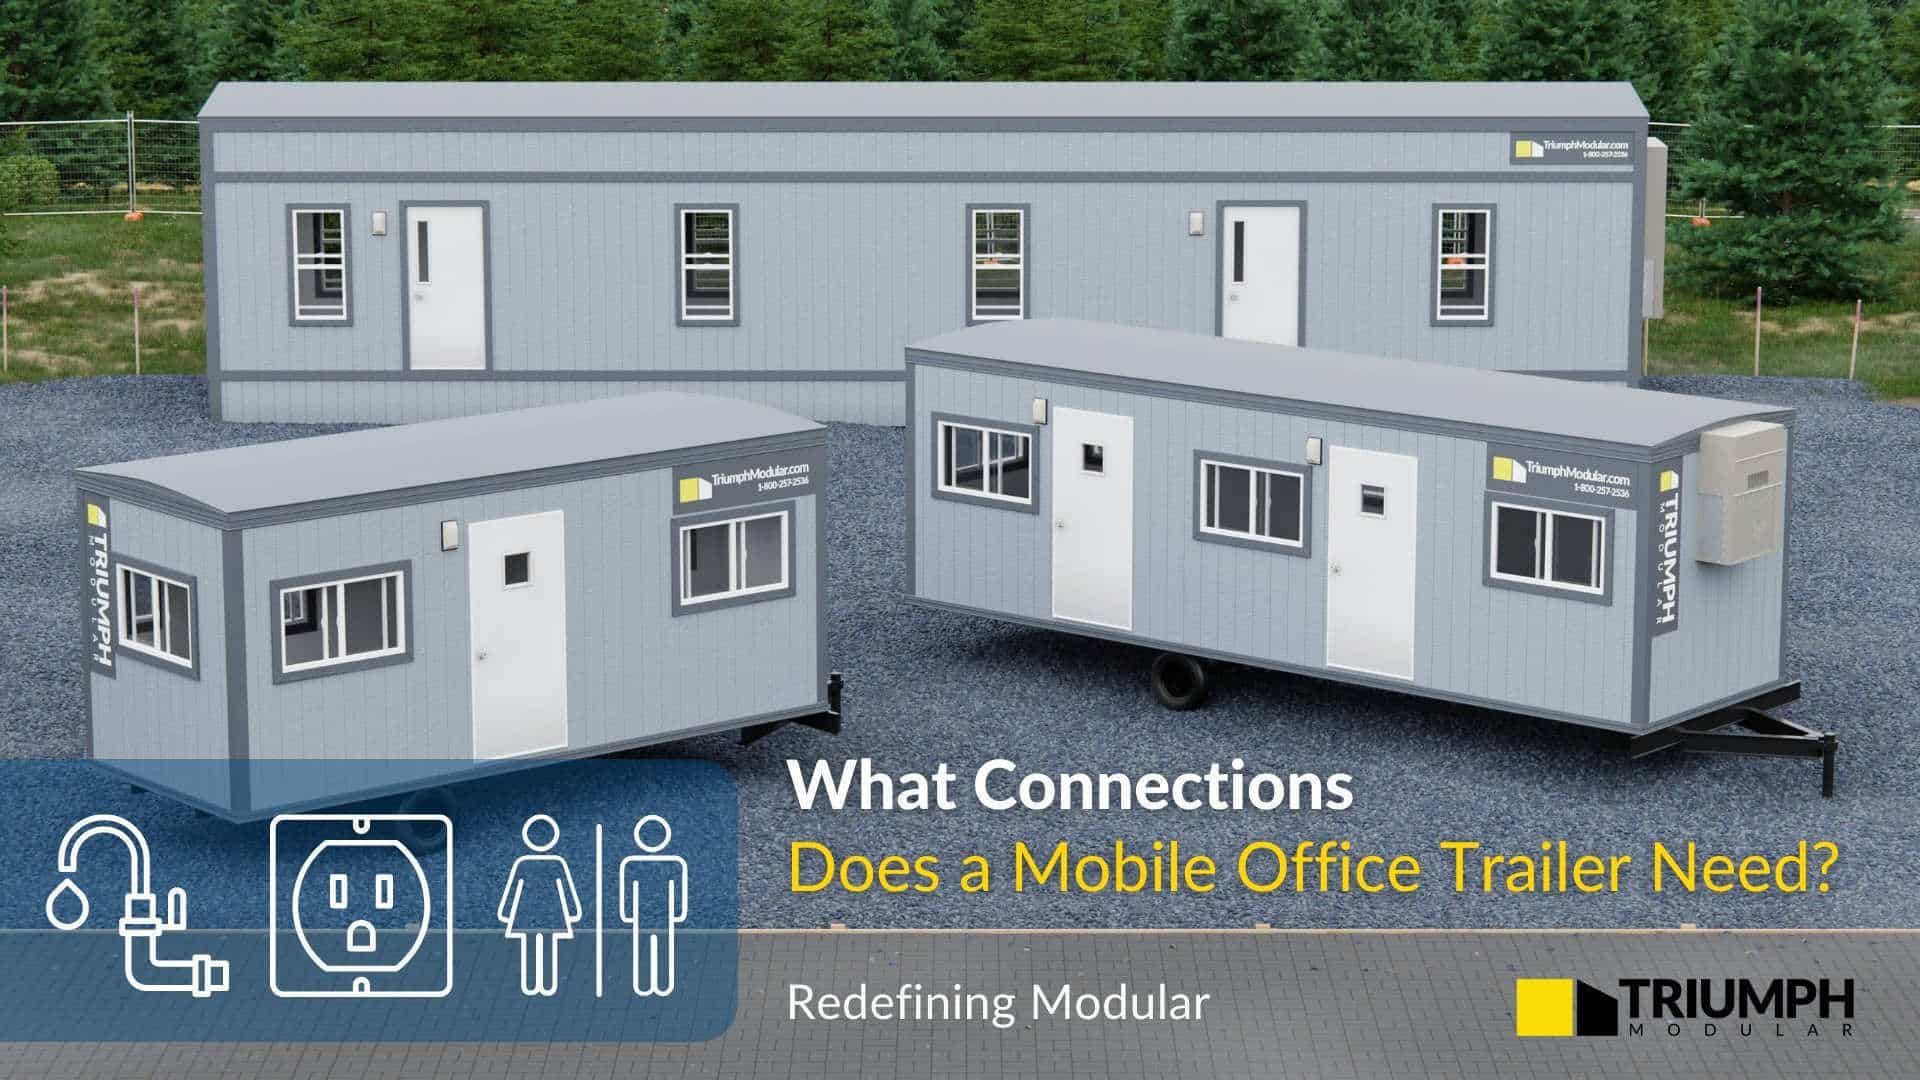 featured image for an article on what connections does a mobile office trailer need